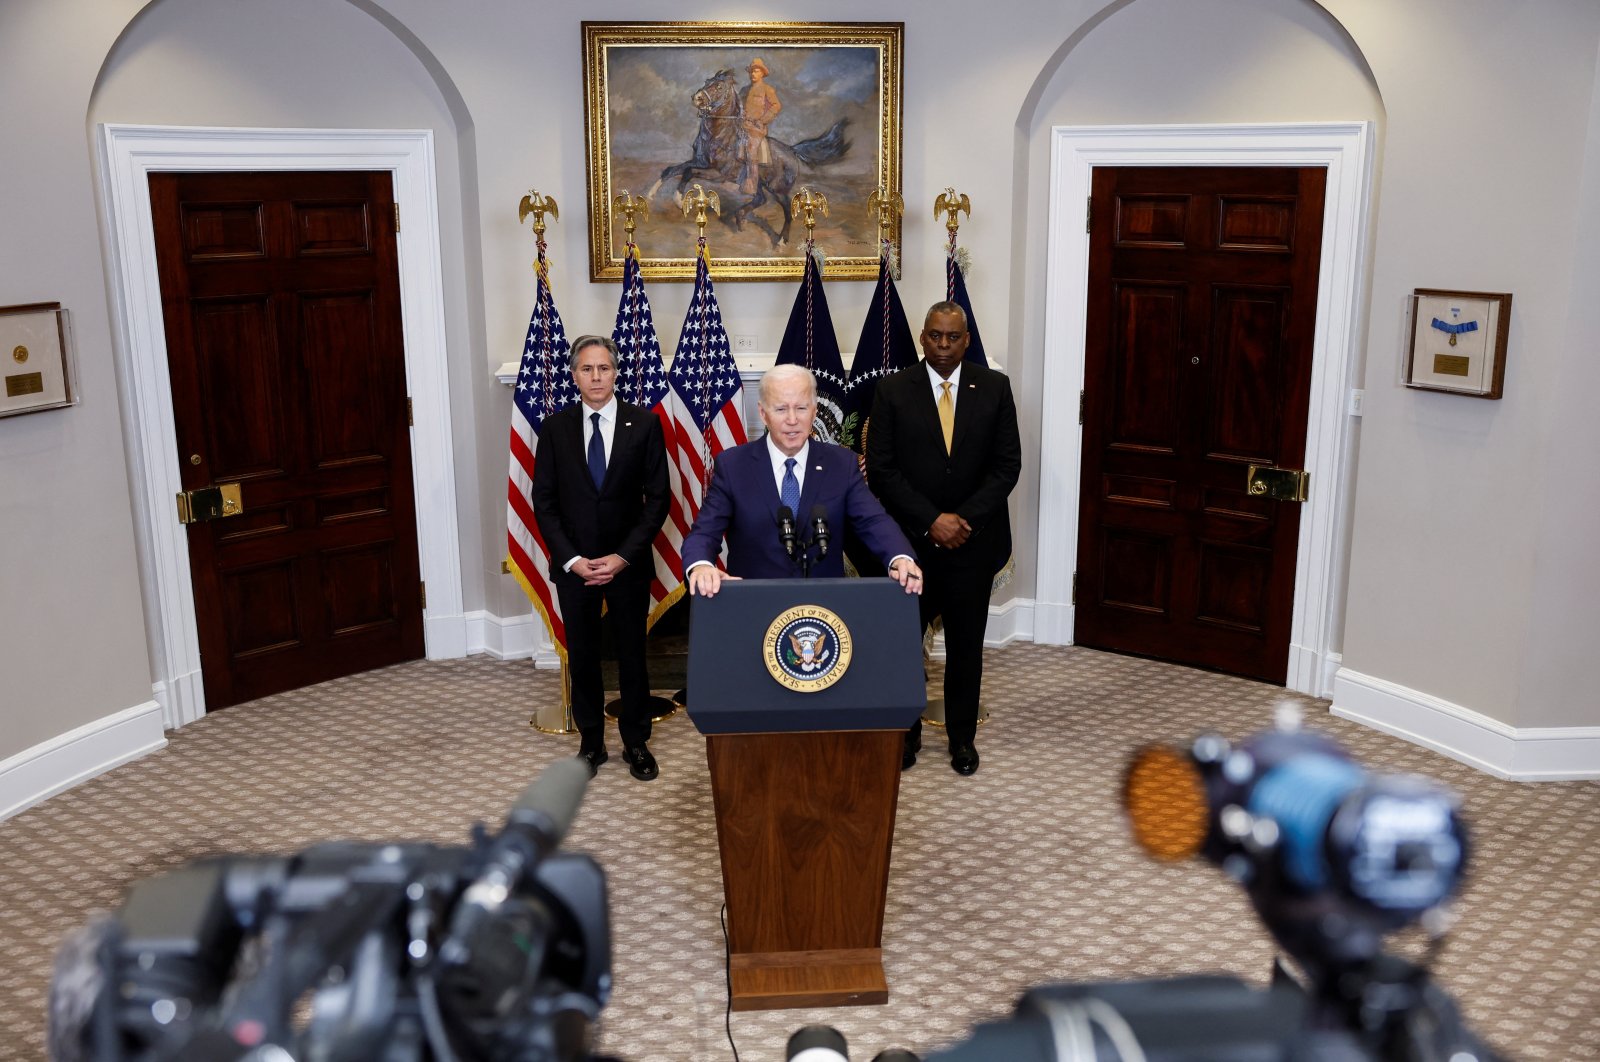 U.S. President Joe Biden is flanked by Secretary of State Antony Blinken and Defense Secretary Lloyd Austin as he delivers remarks on &quot;continued support for Ukraine,&quot; in the Roosevelt Room at the White House in Washington, U.S., Jan. 25, 2023. (Reuters Photo)